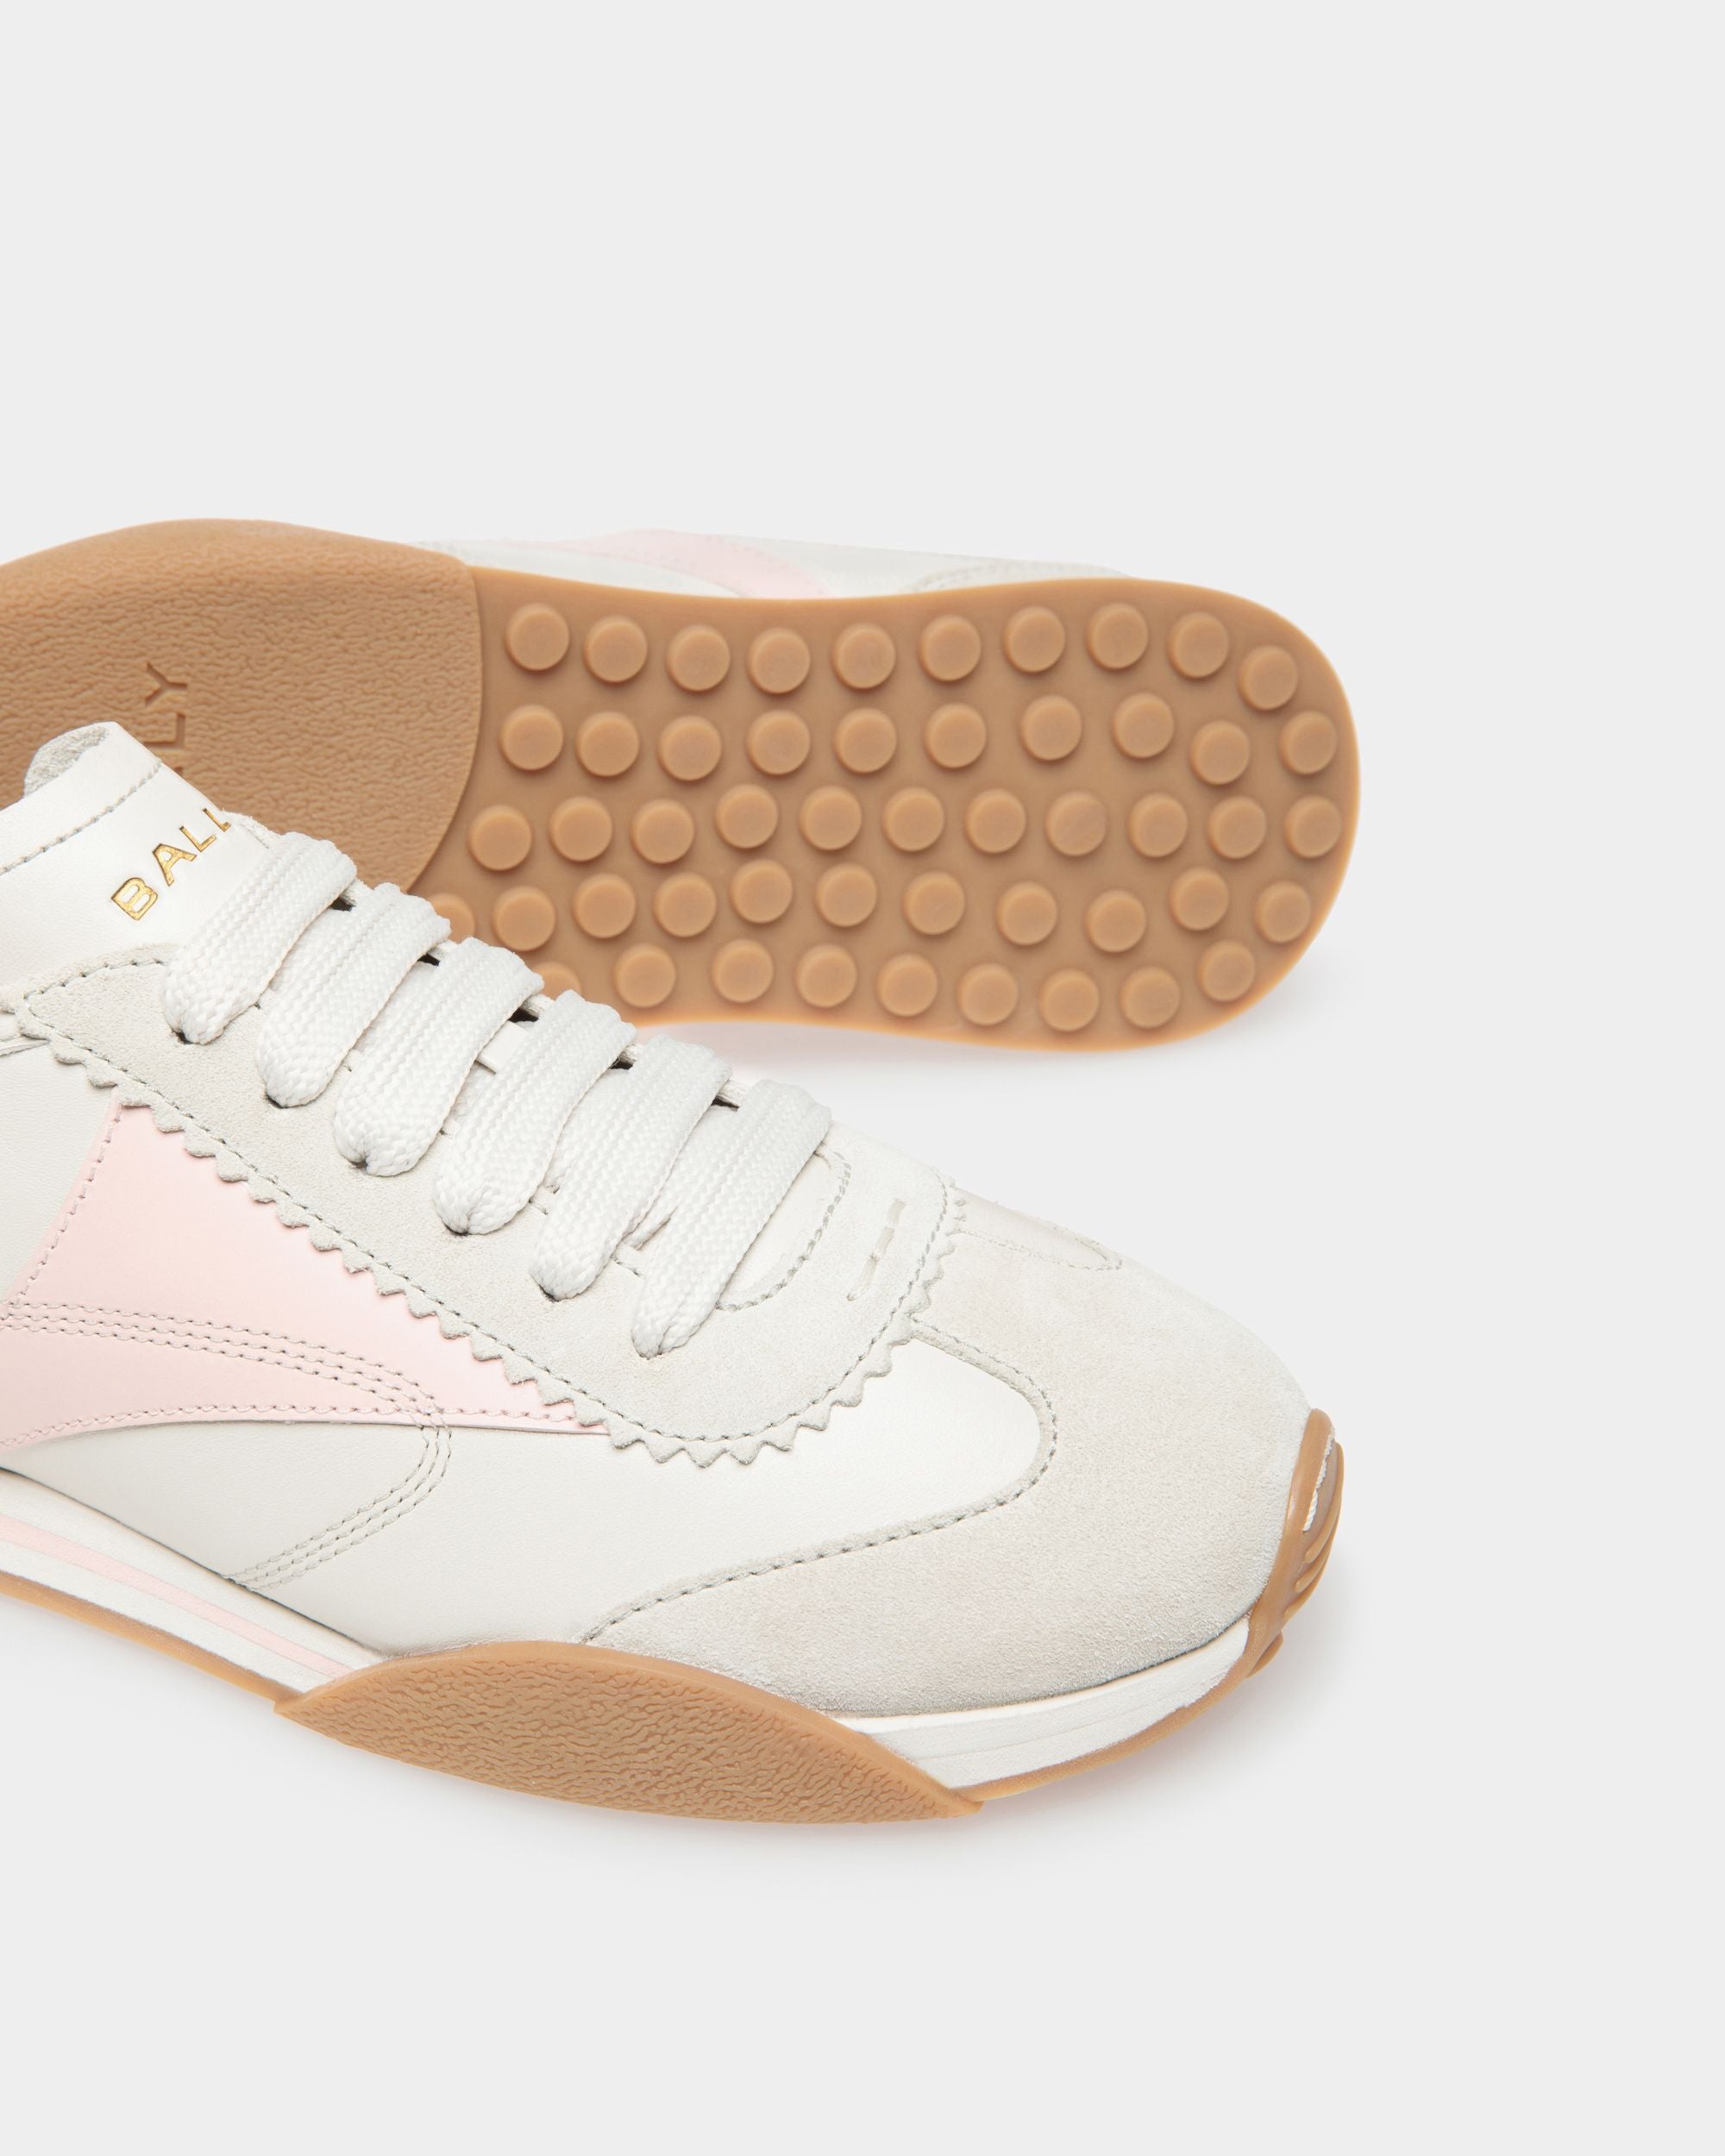 Sonney | Women's Sneakers | Dusty White And Rose Leather | Bally | Still Life Below